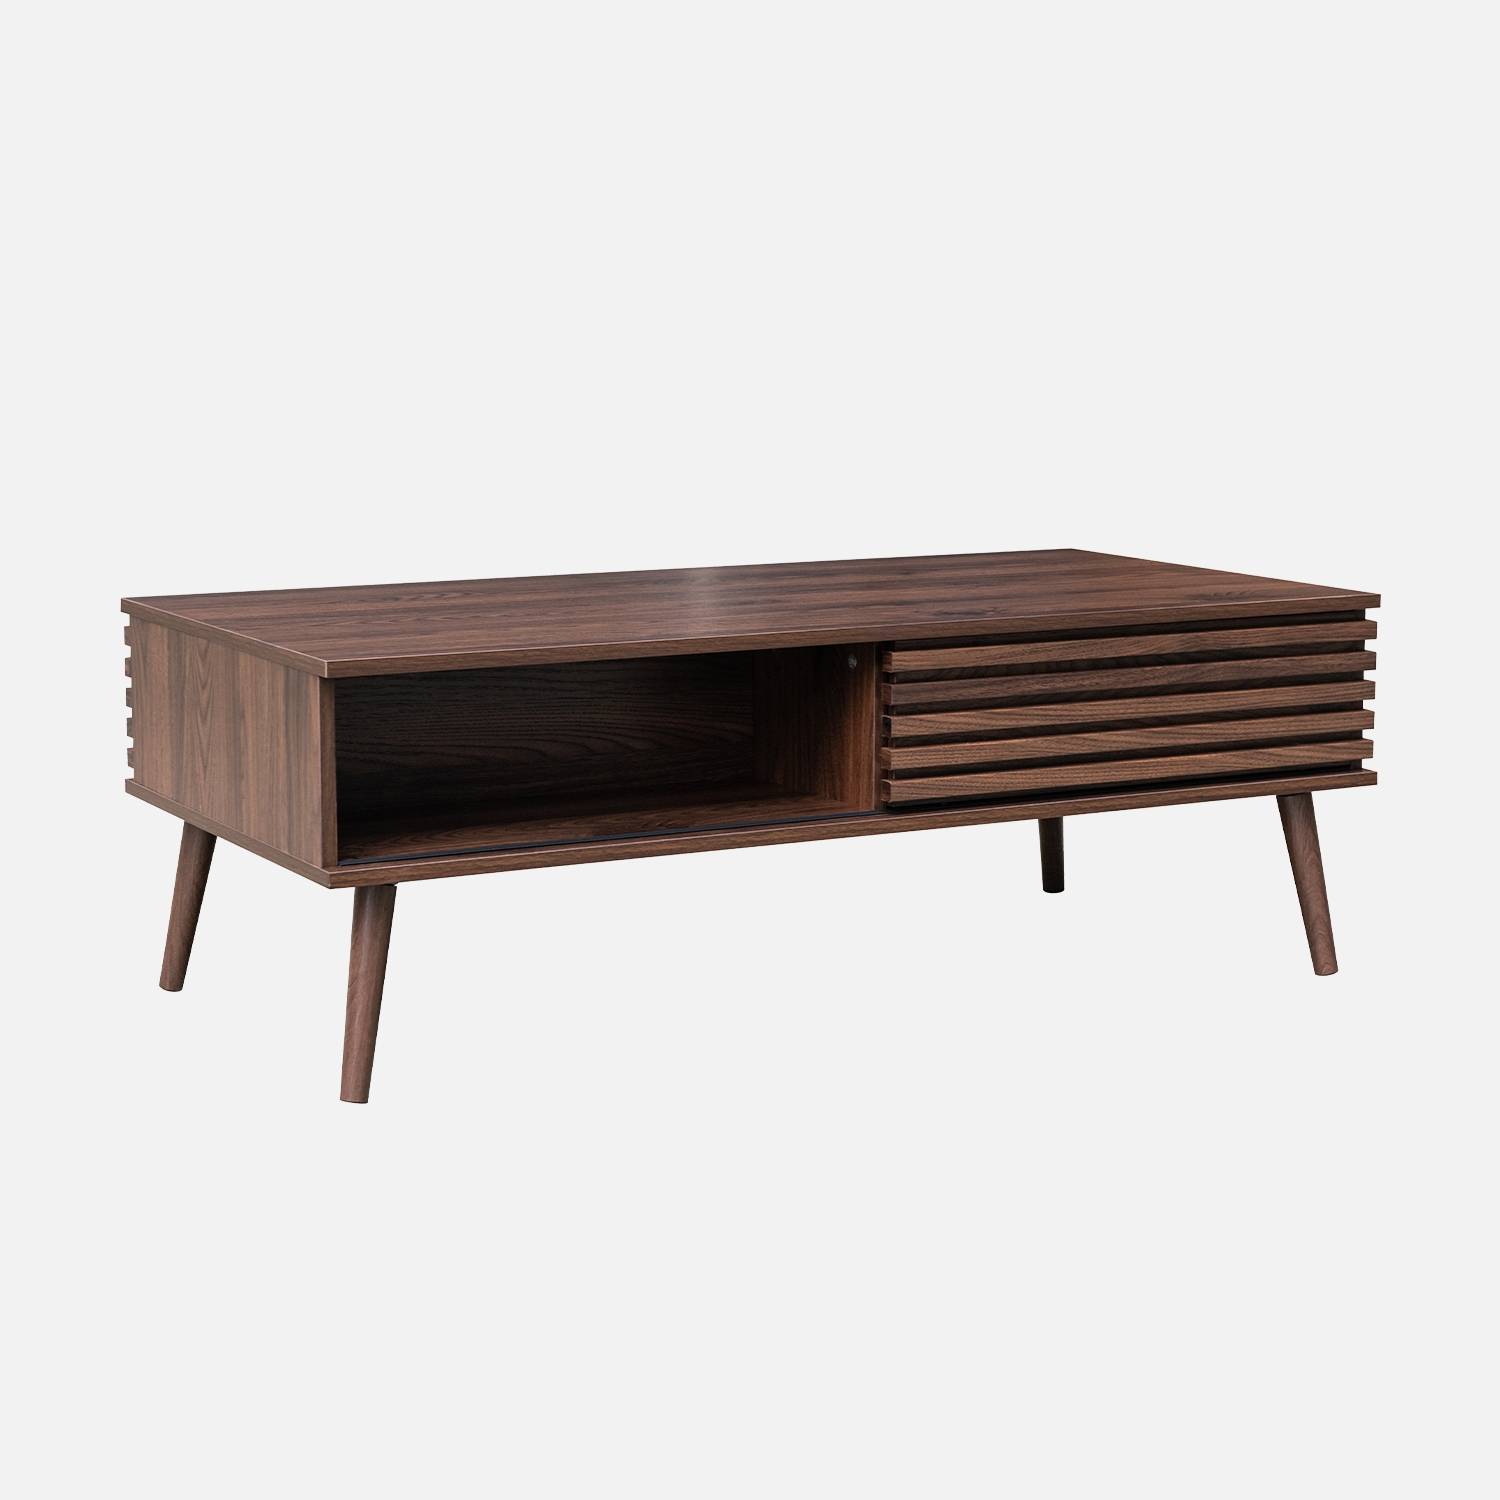 Scandi-style coffee table with wooden grooved effect, Walnut